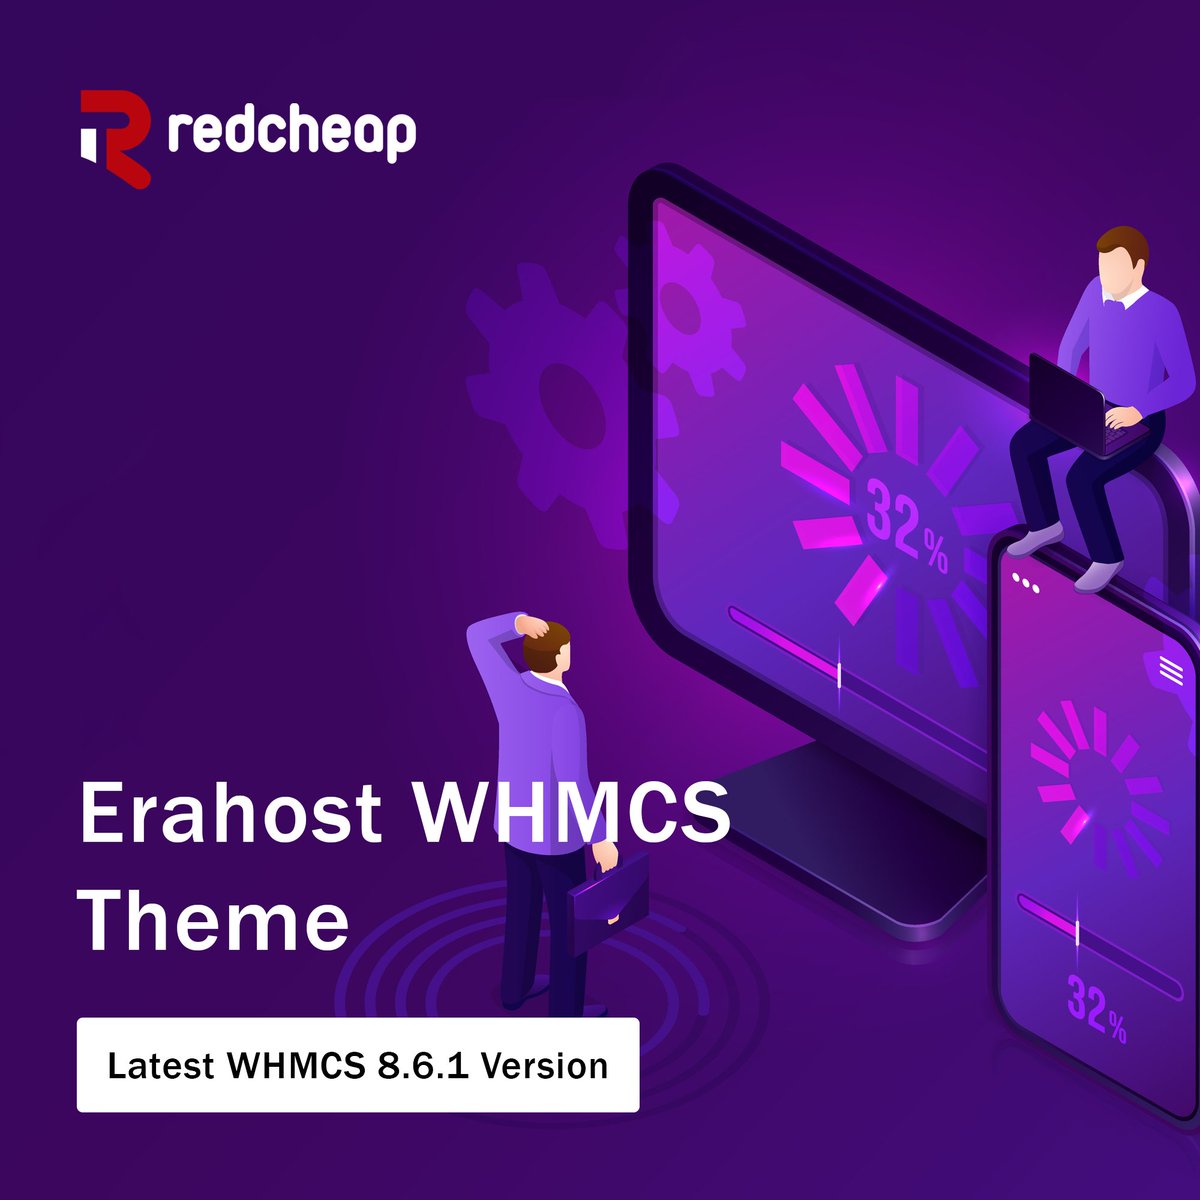 We are excited to share the #1 Selling Erahost WHMCS Theme including the Latest WHMCS 8.6.1 Version.

#WHMCSTheme #LatestWHMCSVersion #WHMCSTemplates #JaiBhim 

rctheme.com/erahost-whmcs-…